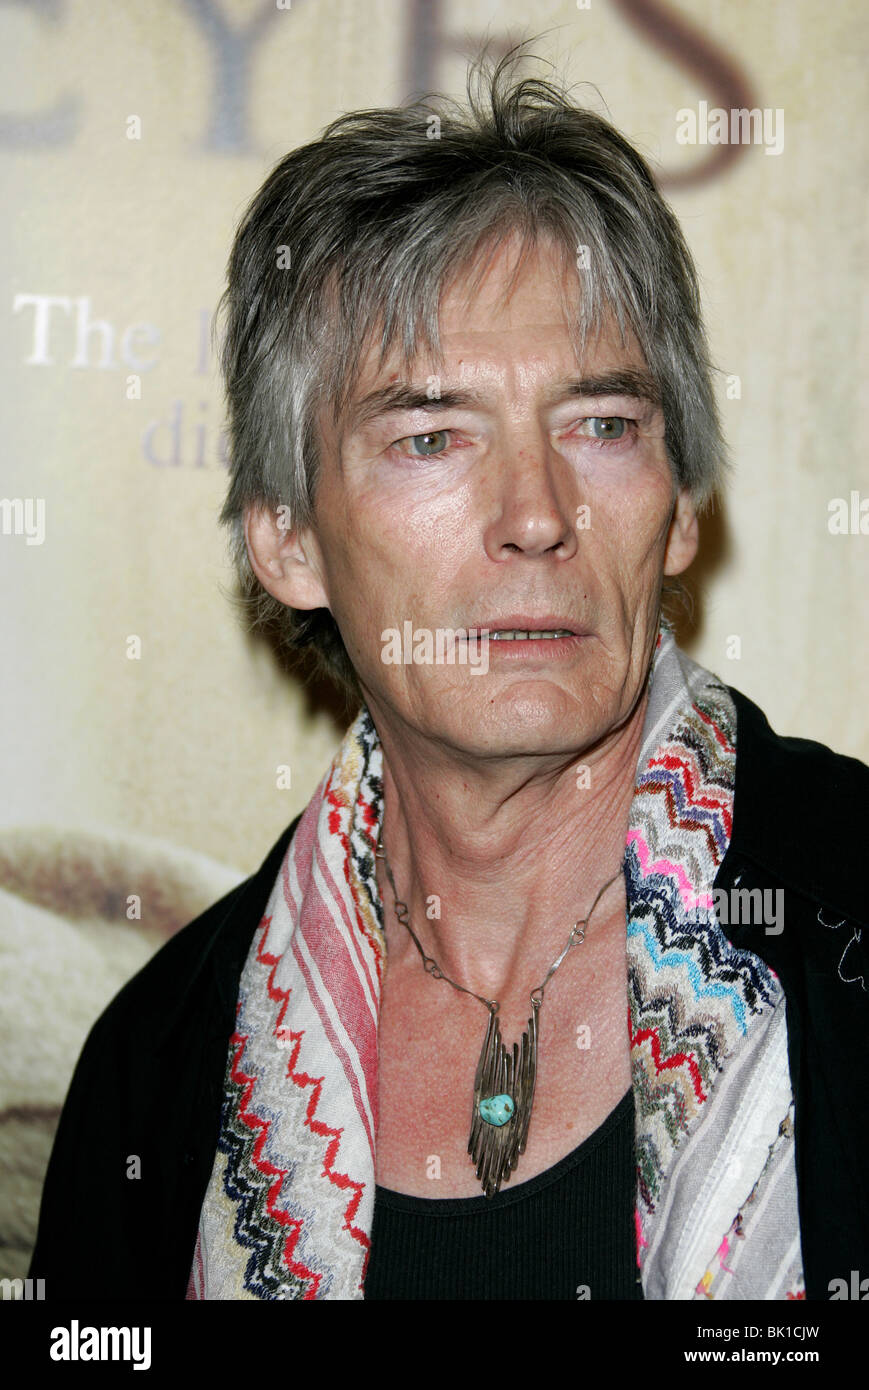 BILLY DRAGO THE HILLS HAVE EYES PREMIERE ARCLIGHT HOLLYWOOD LOS ANGELES USA 09 March 2006 Stock Photo